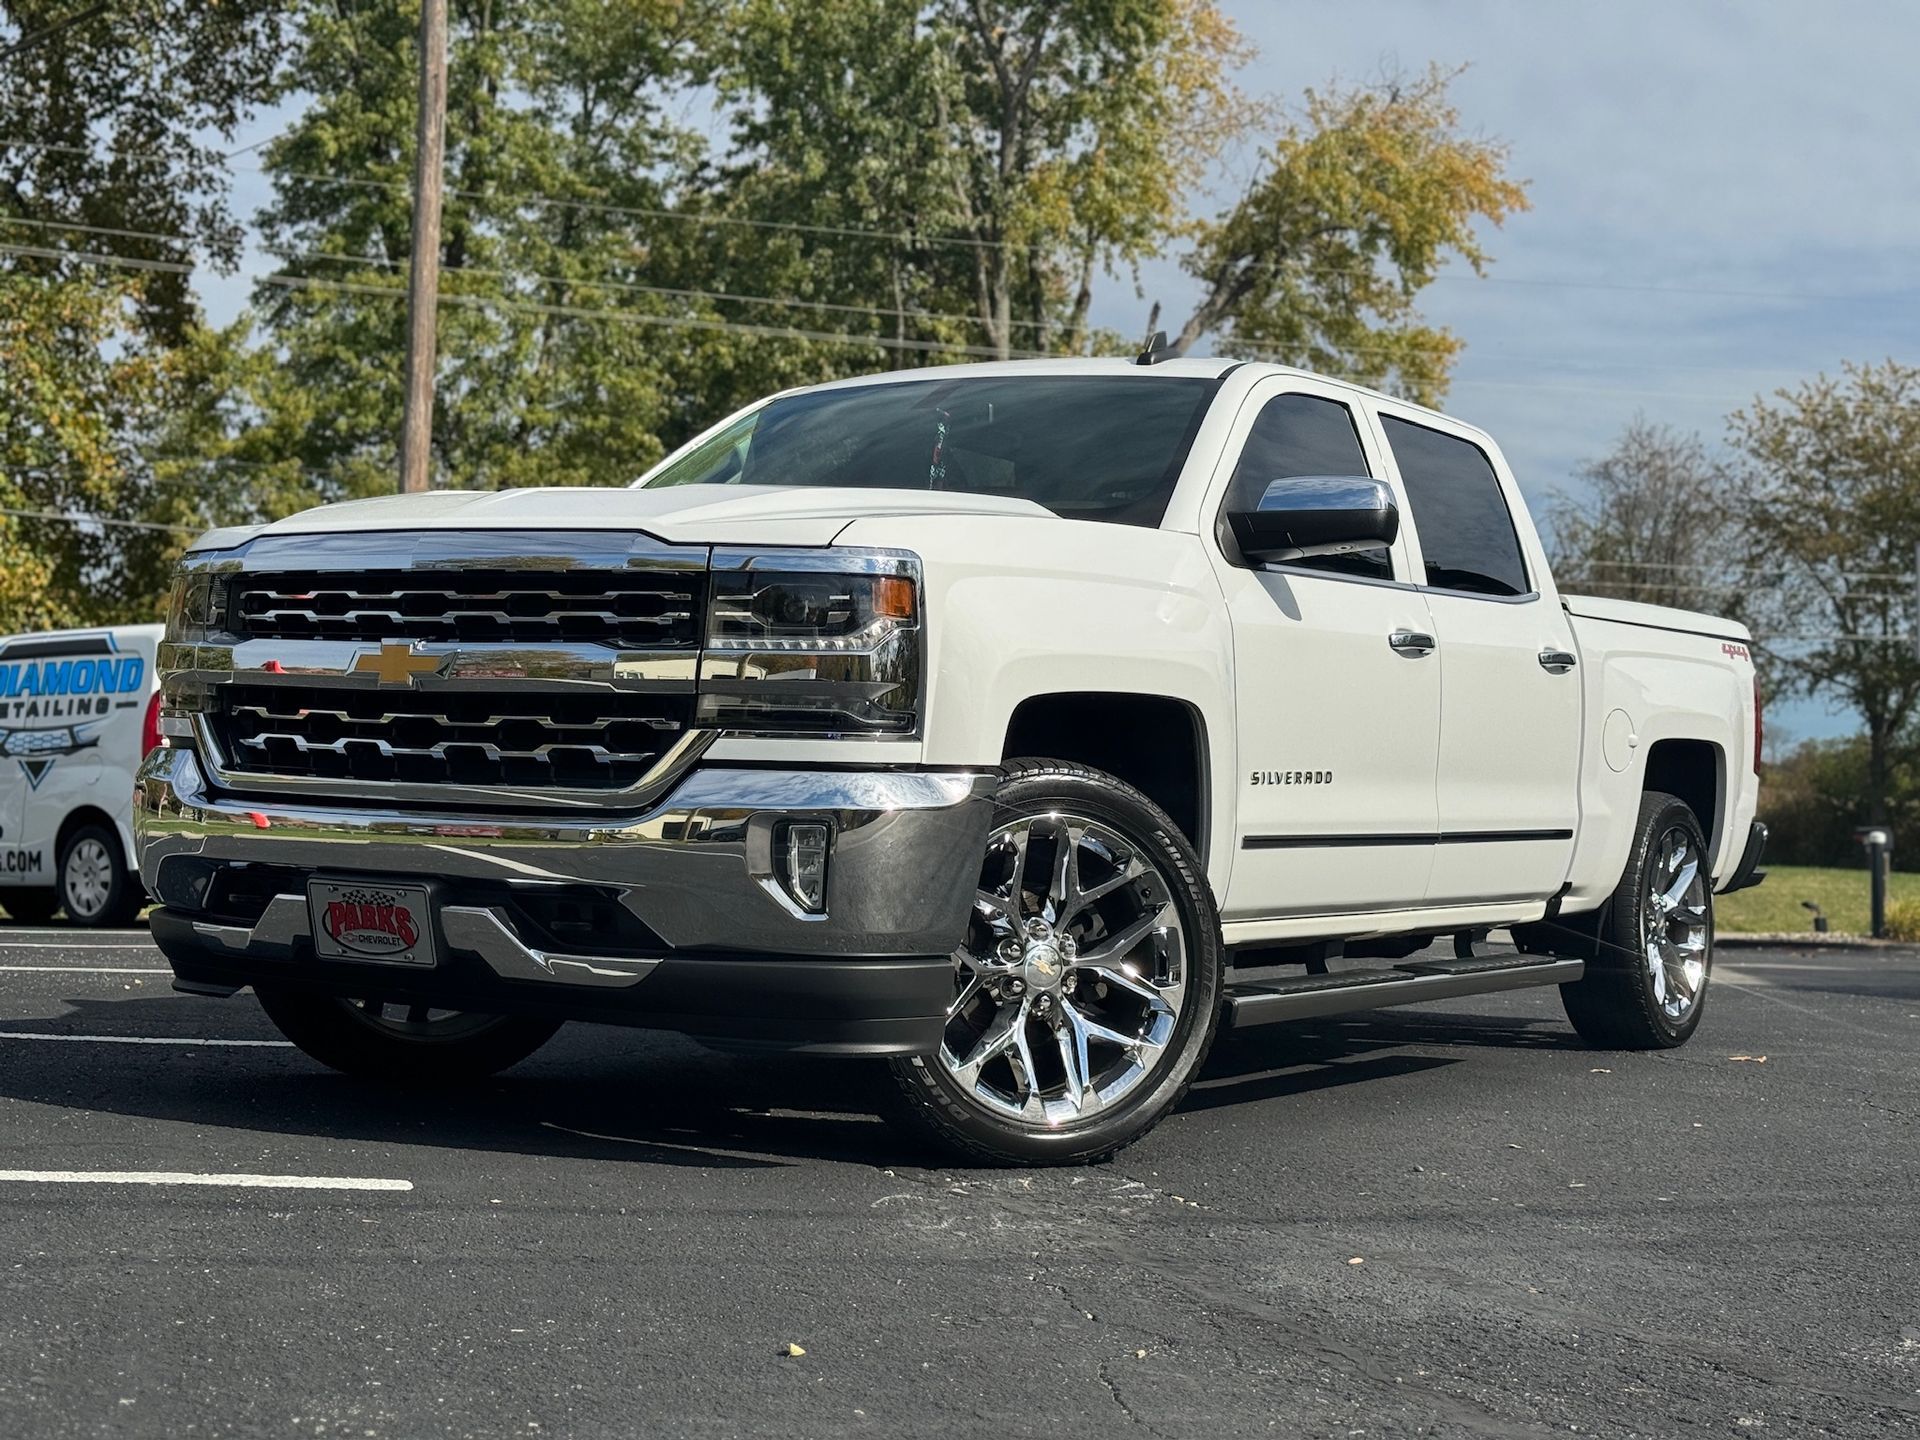 a white chevrolet silverado pickup truck is parked in a parking lot .